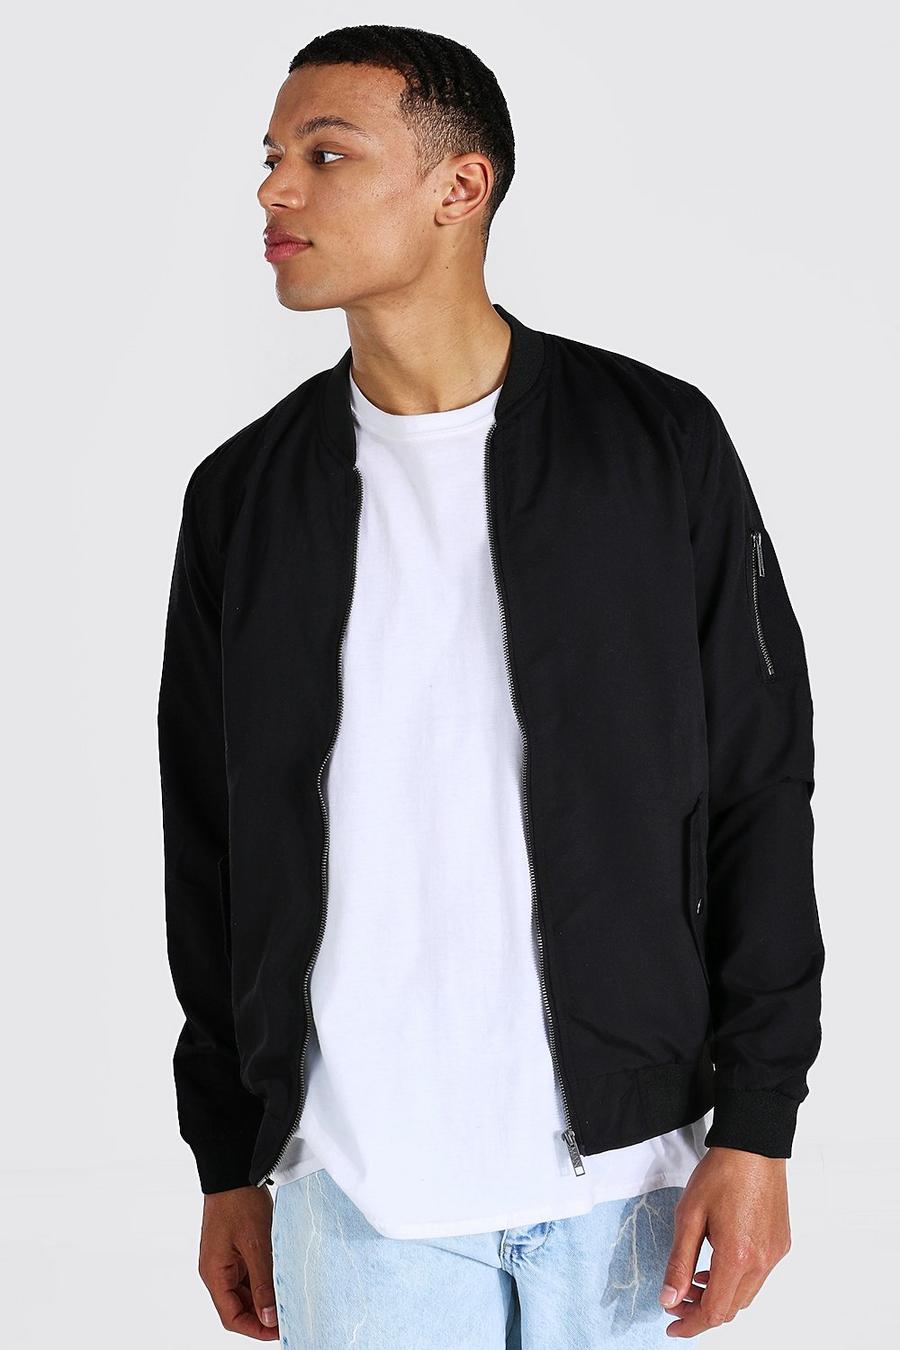 Bomber Jackets for Tall Men in Black L / Extra Tall / Black